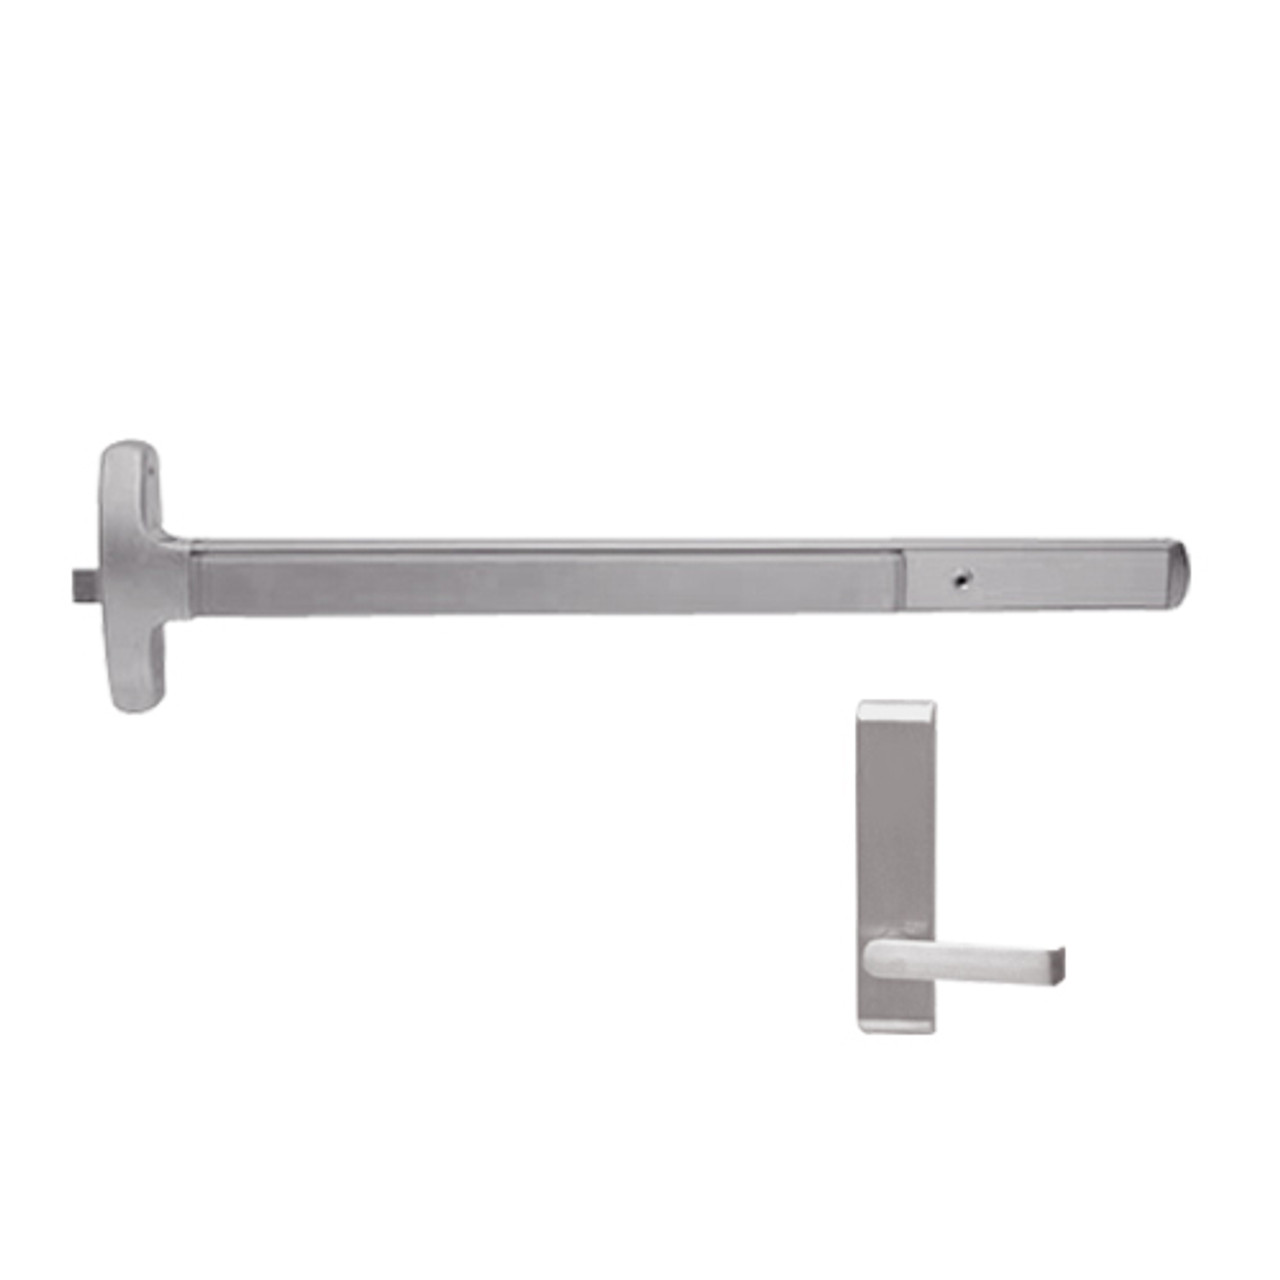 24-R-L-DT-DANE-US32D-3-RHR Falcon Exit Device in Satin Stainless Steel